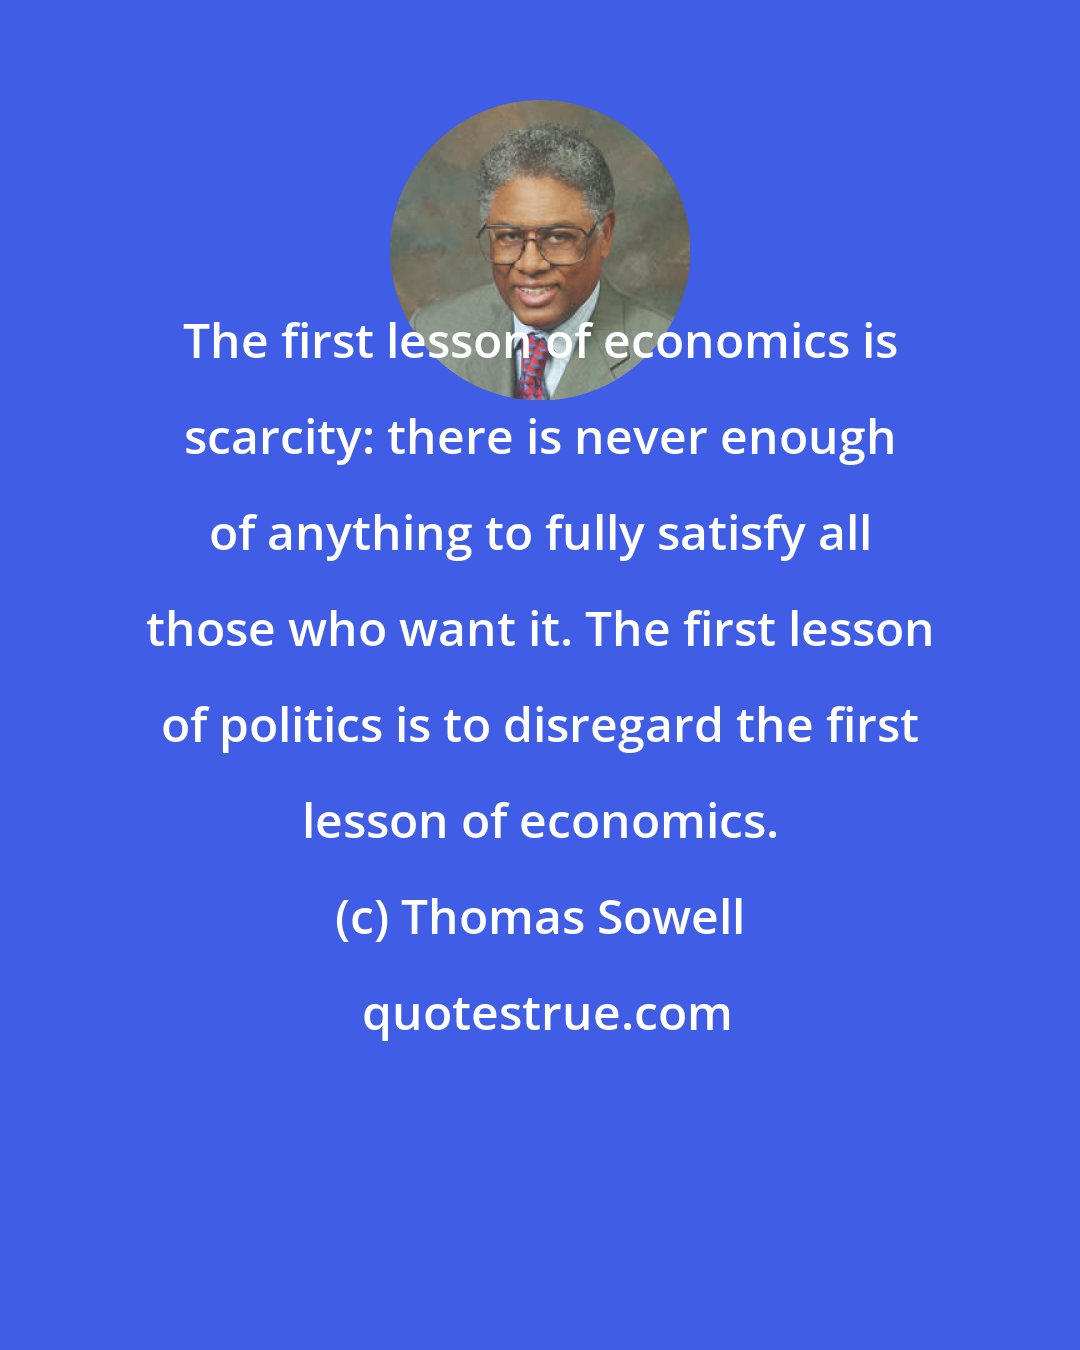 Thomas Sowell: The first lesson of economics is scarcity: there is never enough of anything to fully satisfy all those who want it. The first lesson of politics is to disregard the first lesson of economics.